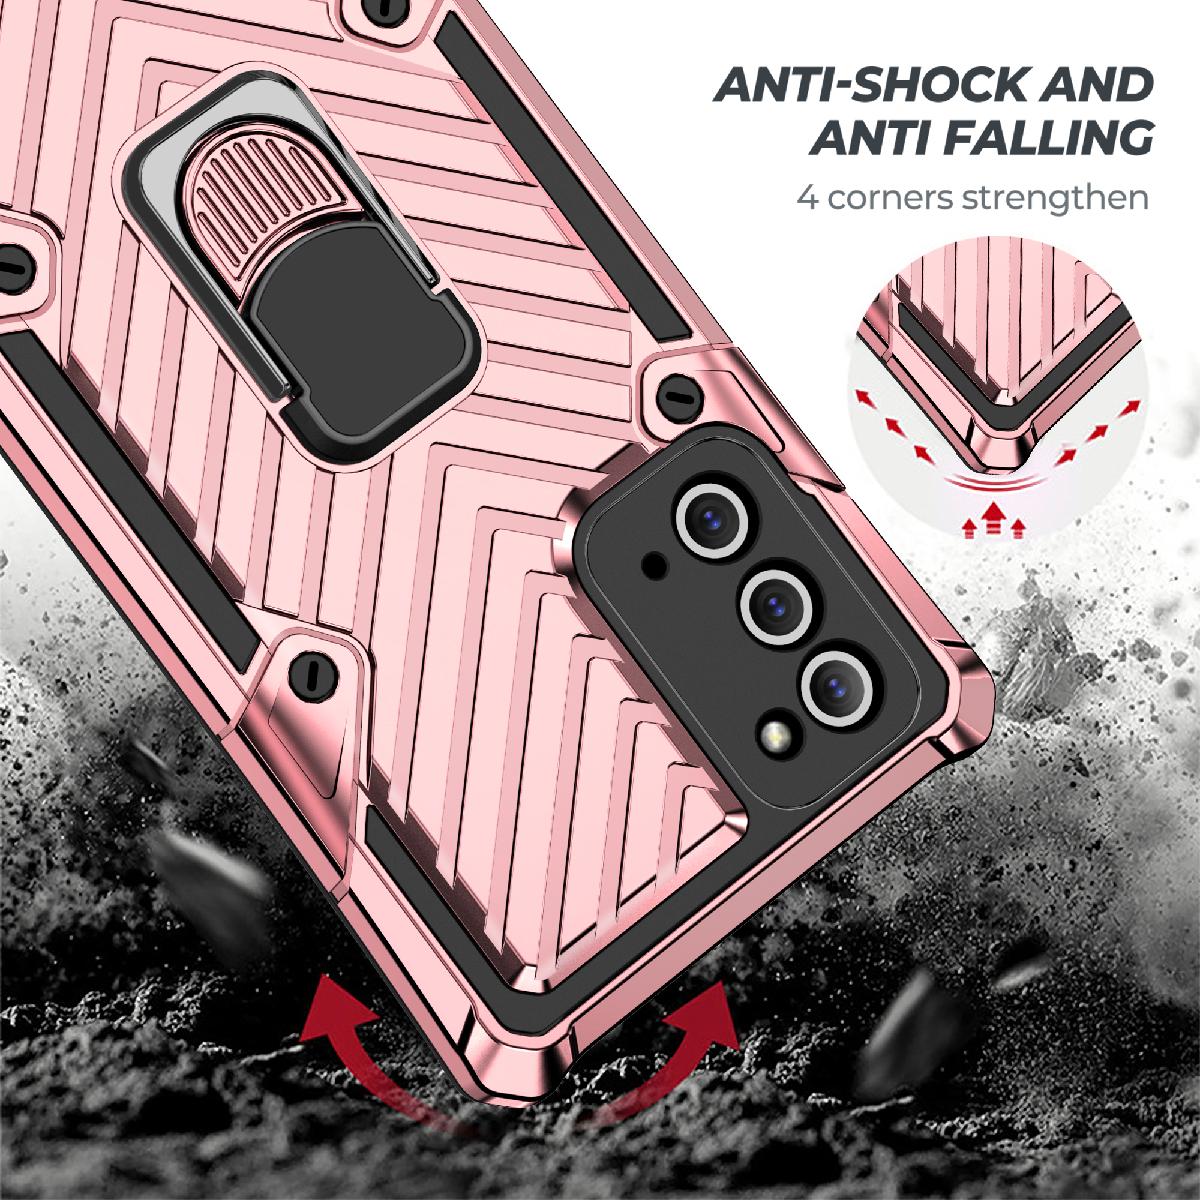 Reiko Kickstand Anti-Shock And Anti Falling Case for SAMSUNG GALAXY NOTE 20 ULTRA In Rose Gold